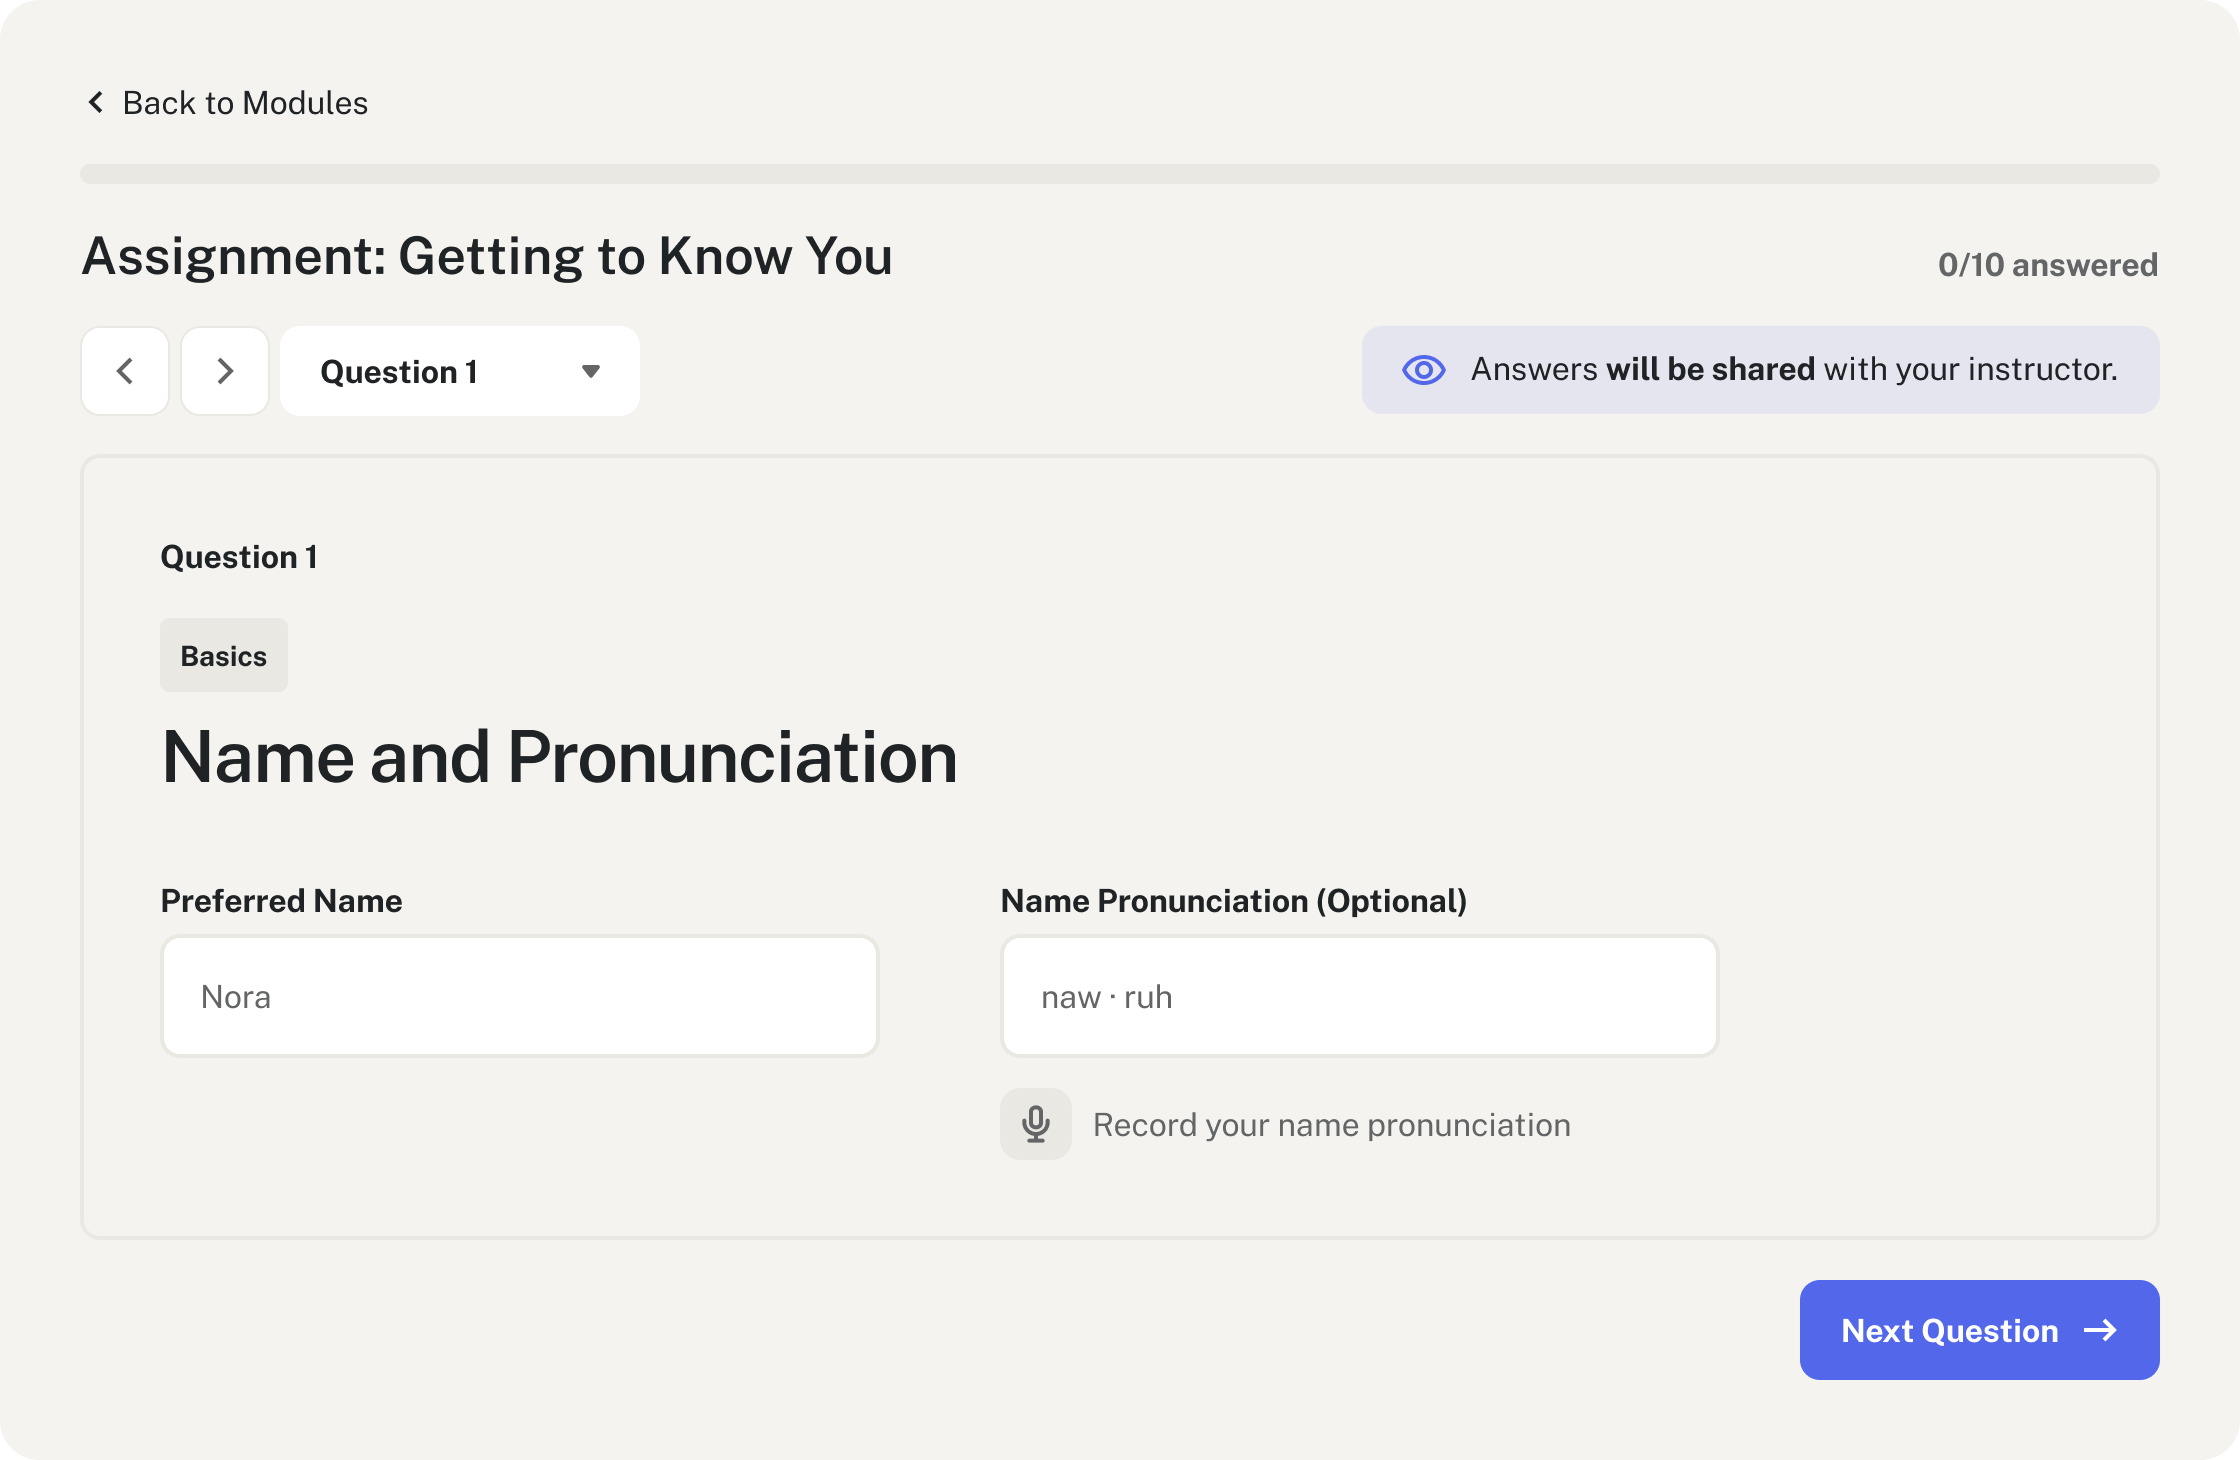 The name and pronunciation section of the Lumen introductory questionnaire.